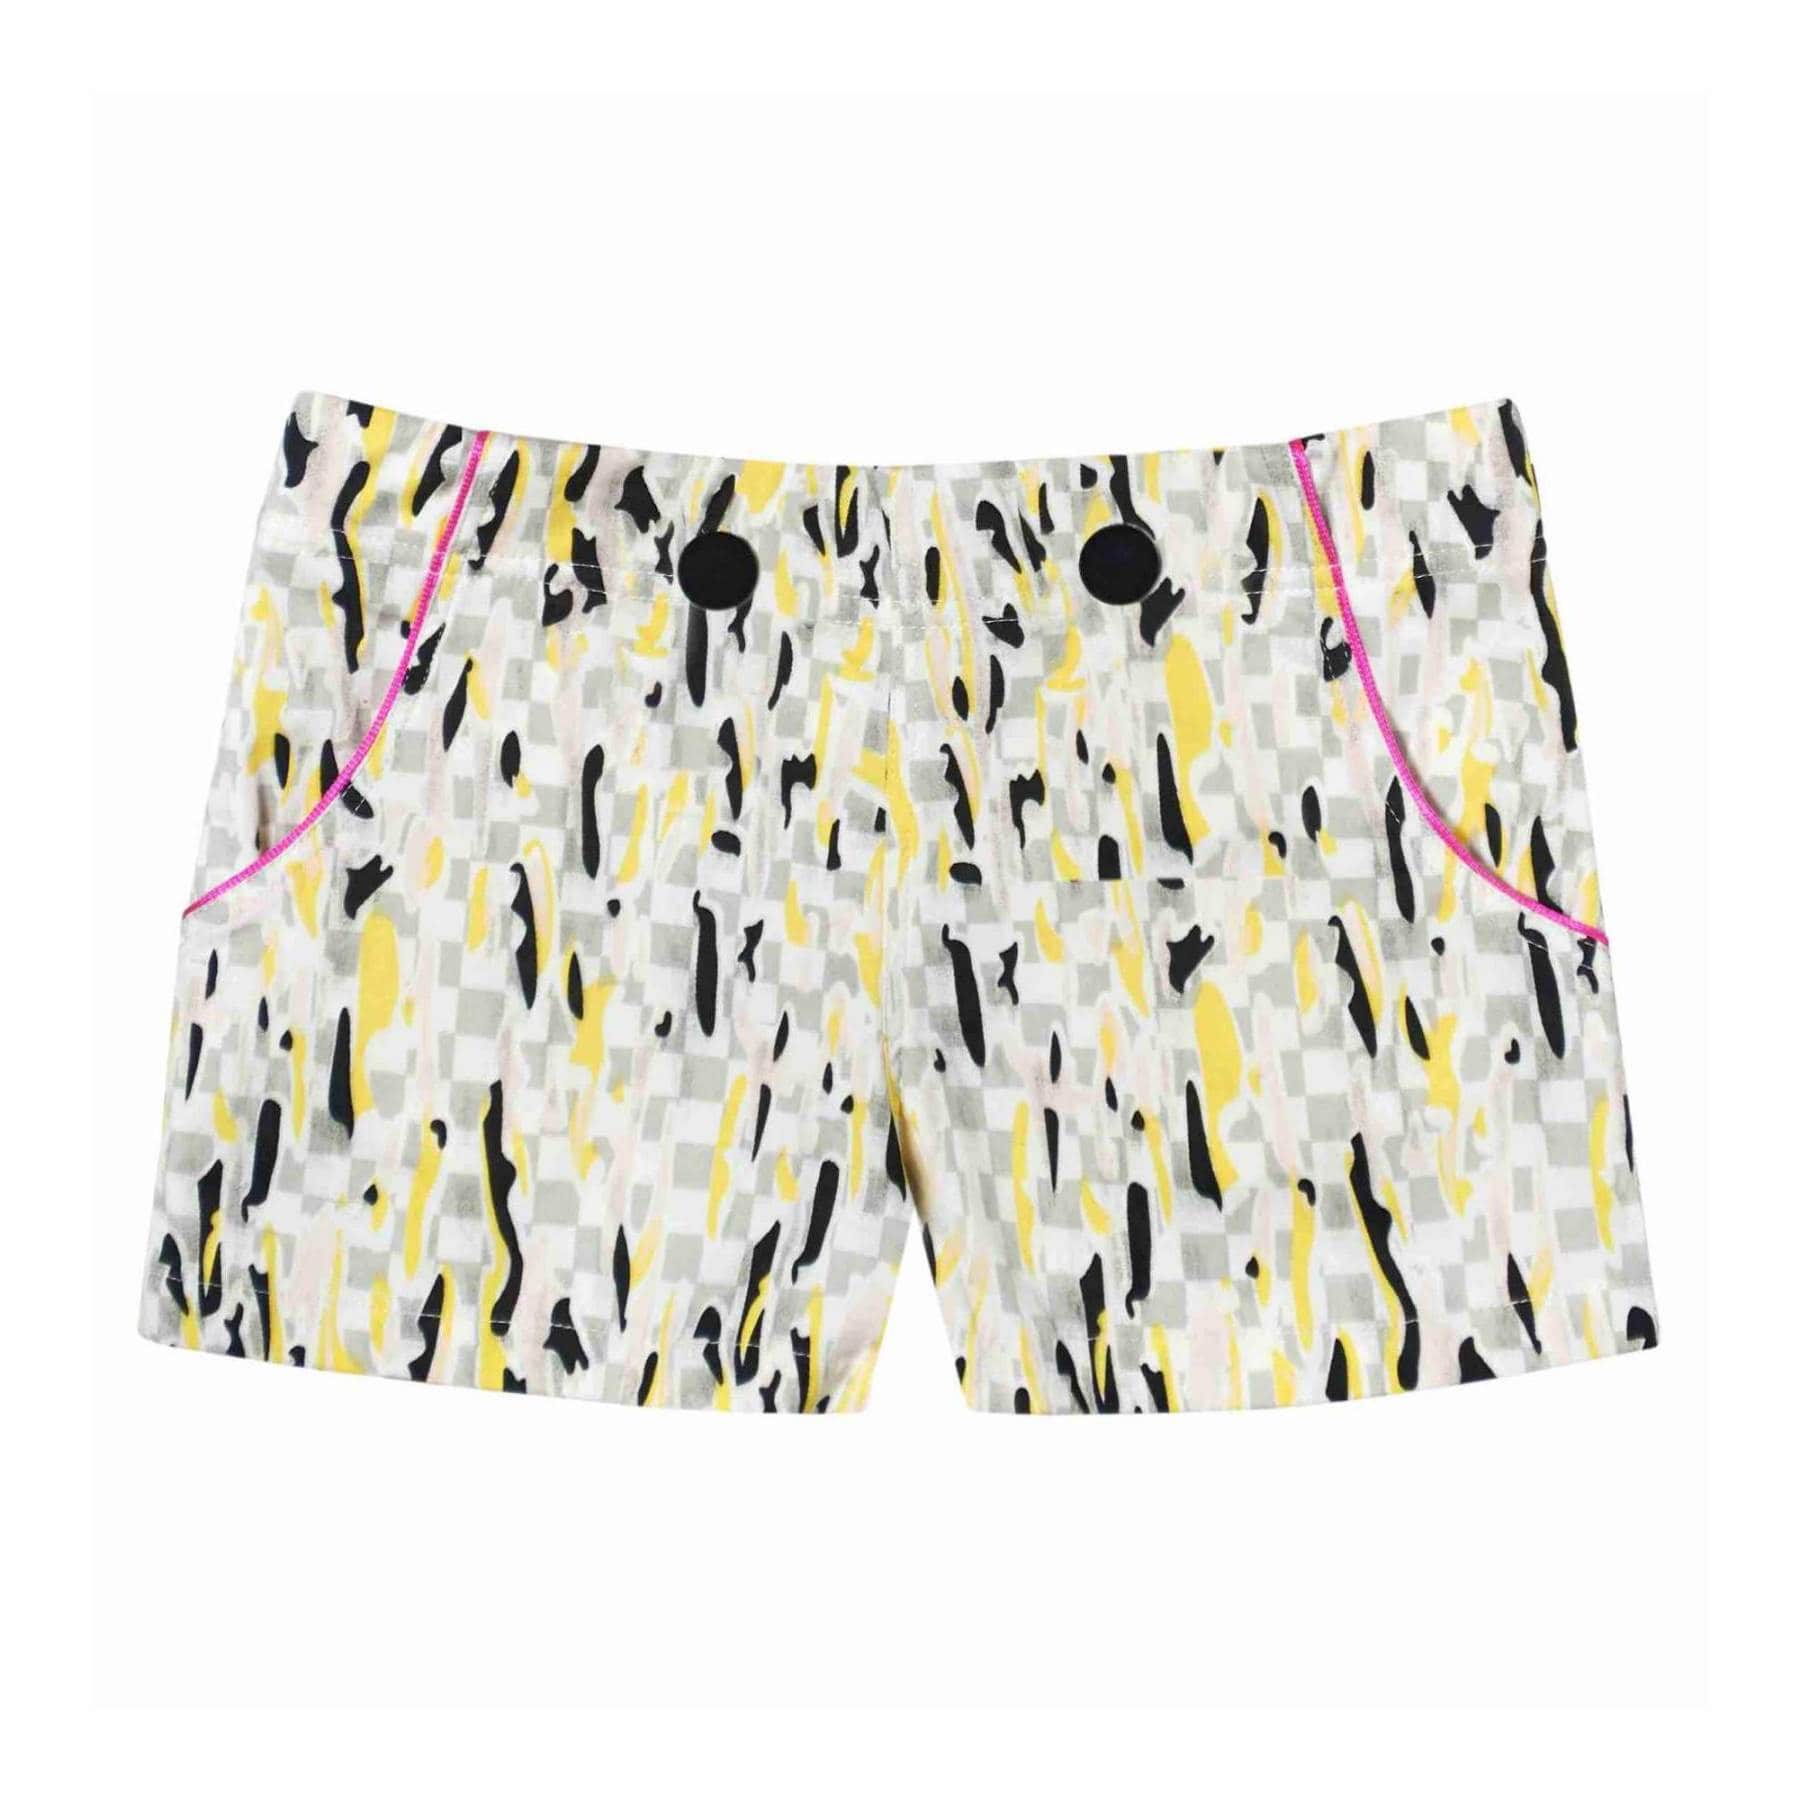 White, grey, yellow printed cotton shorts with. fuchsia pink bias and large black decorative button. Shorts for girls and. girls from the children's fashion brand LA FAUTE A VOLTAIRE